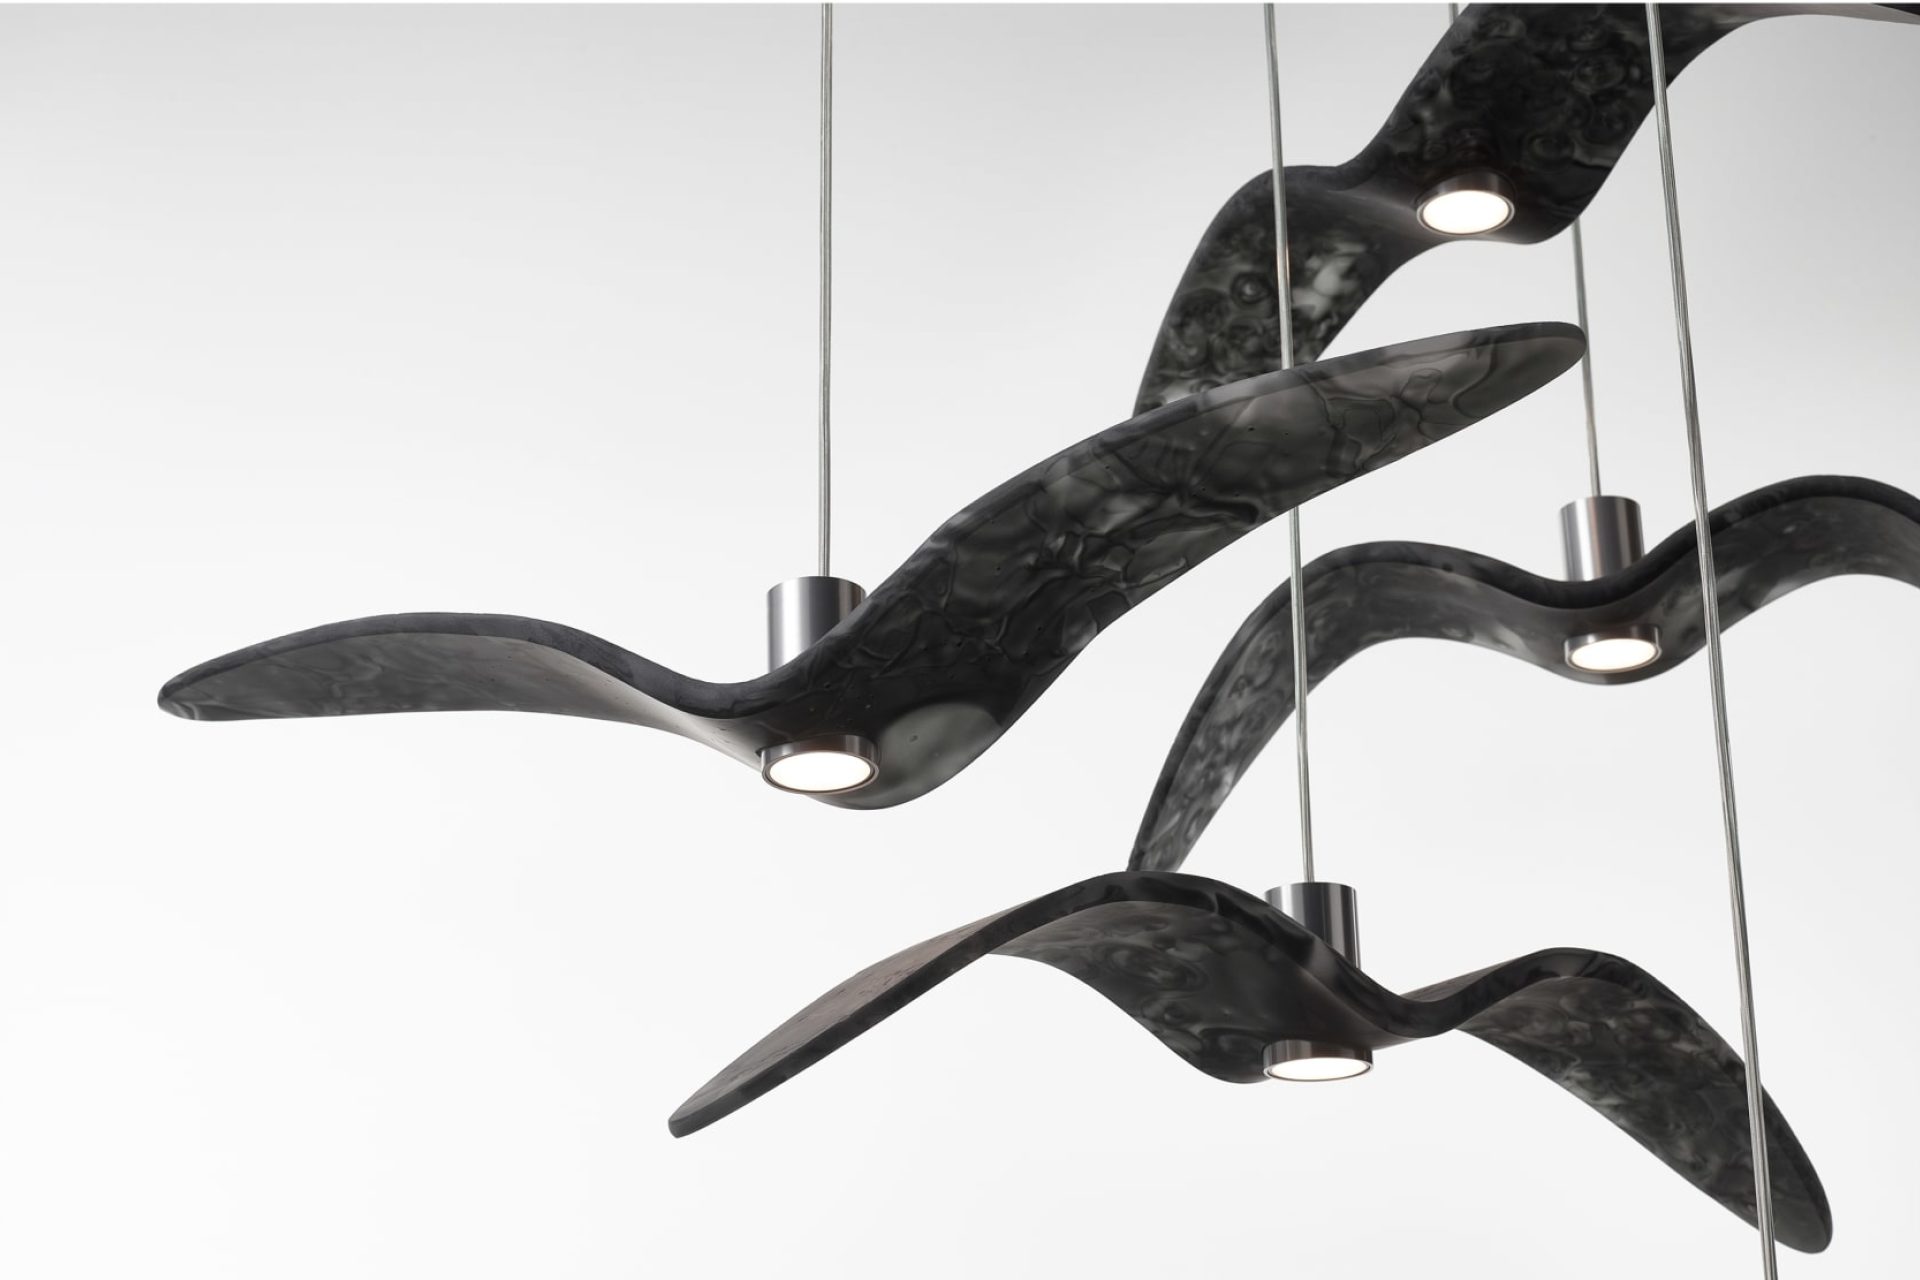 Four black pendant glass lamps in the shape of a bird